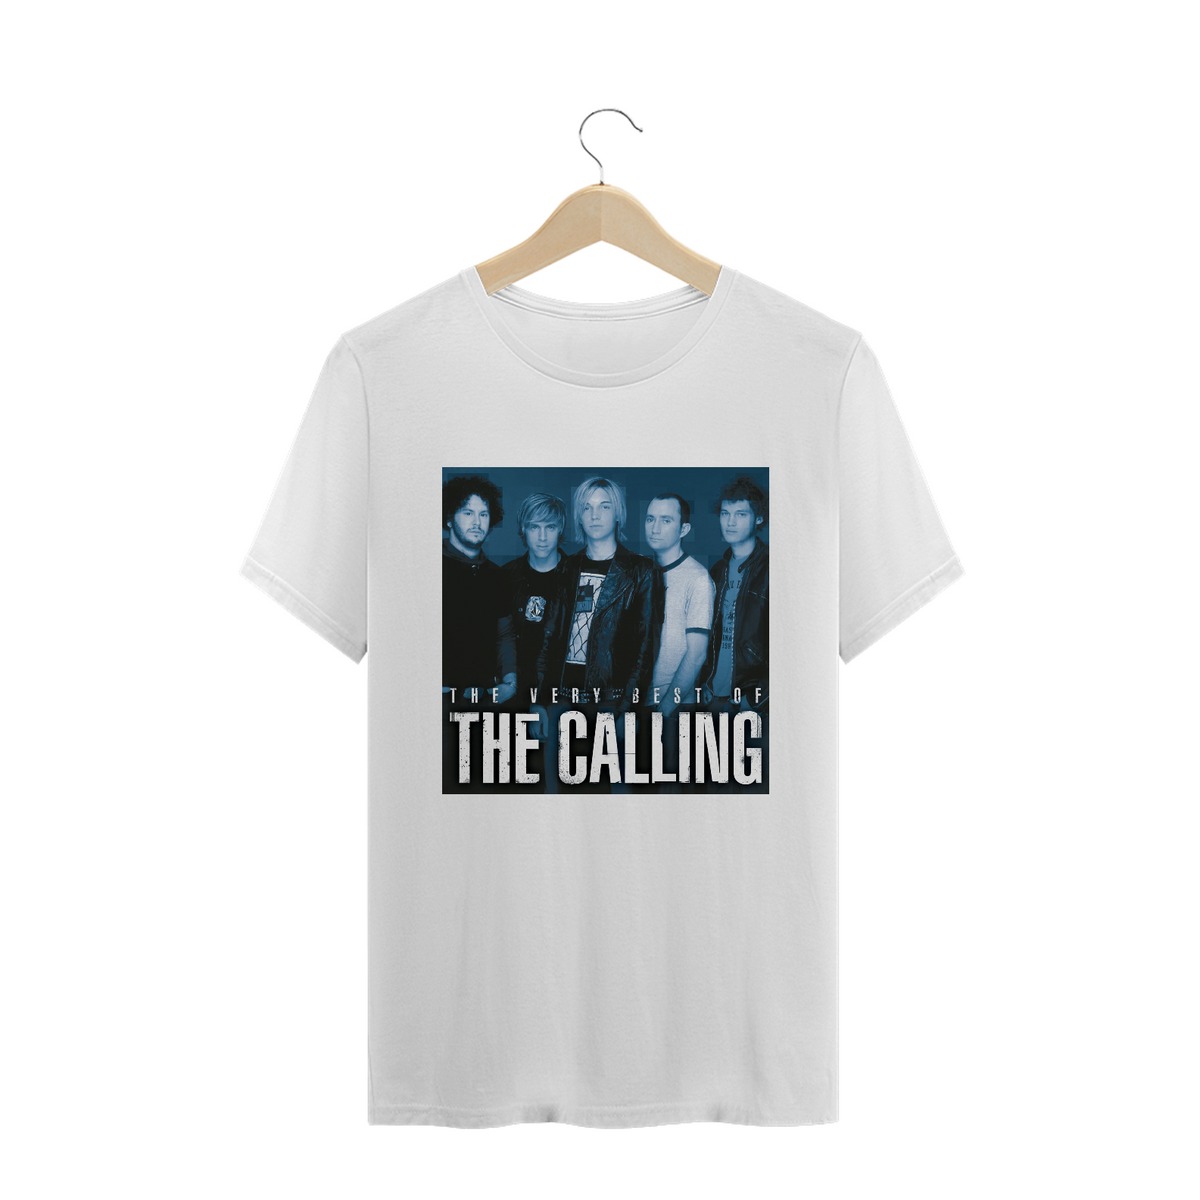 Nome do produto: Camisa The Calling - The Very Best